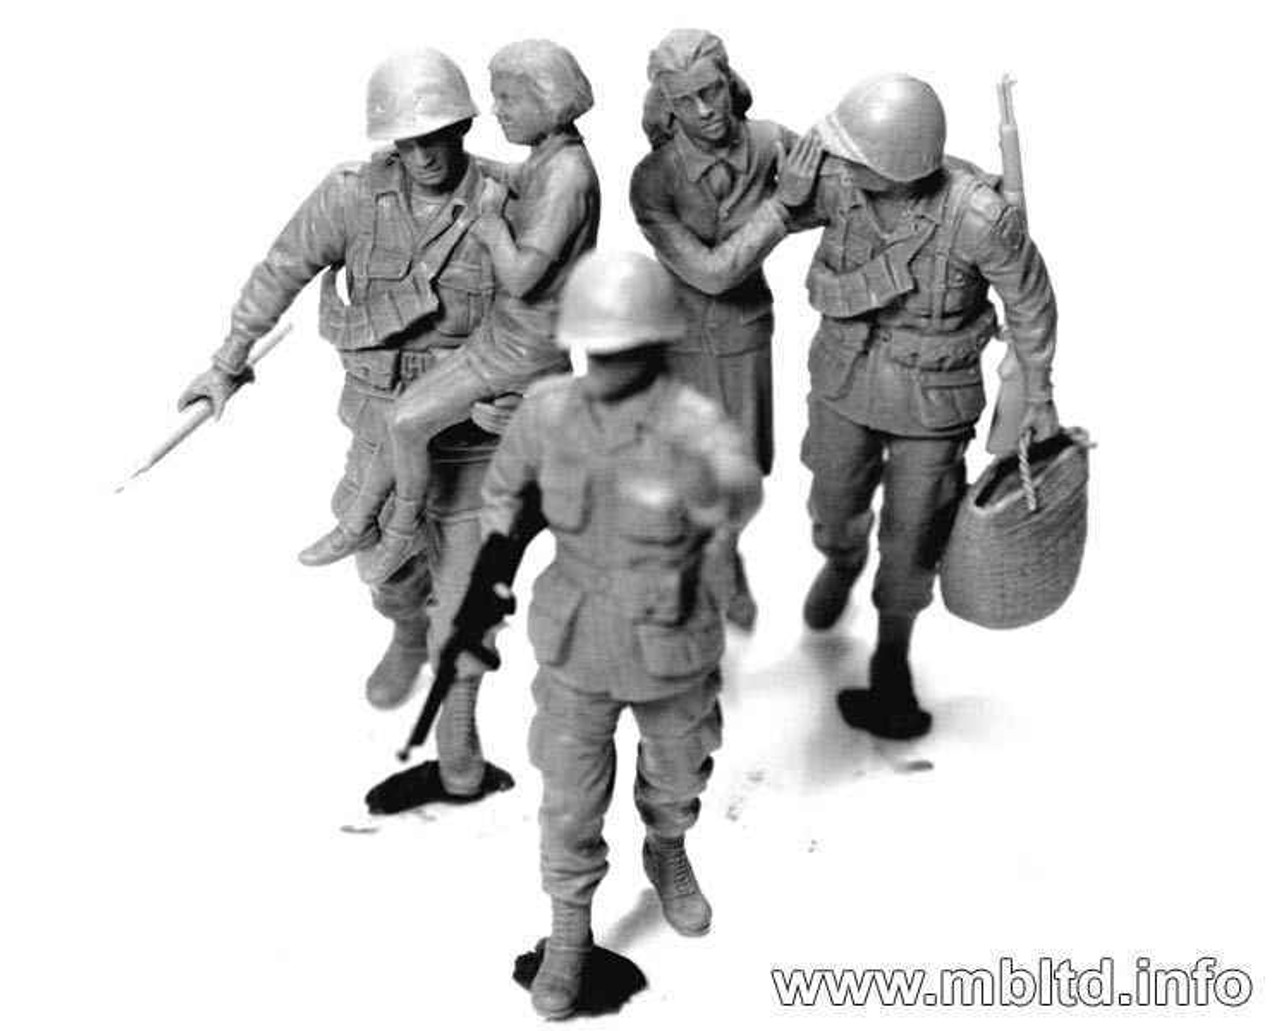 MBL03578 1/35 Master Box US Soldiers and Civilians France 6 Figs 2 Horses and Cart MMD Squadron